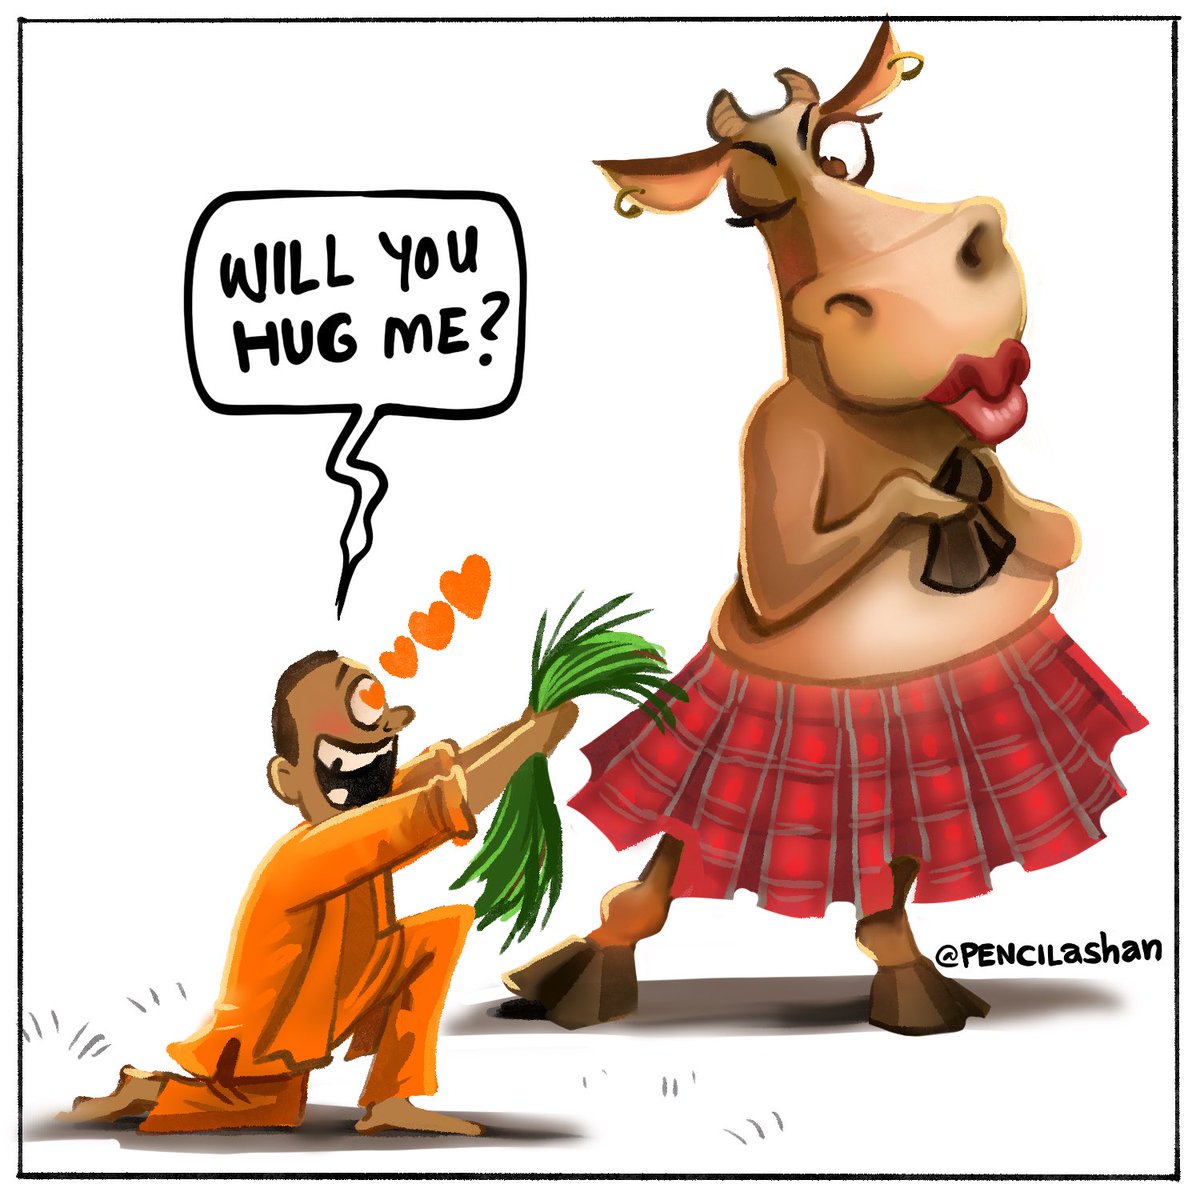 Proposal day 🧡😍
#proposalday #indiangovernment #cowhugday #cowlovers #saveindia #cow #cartoon #indianpolitics #india #indians